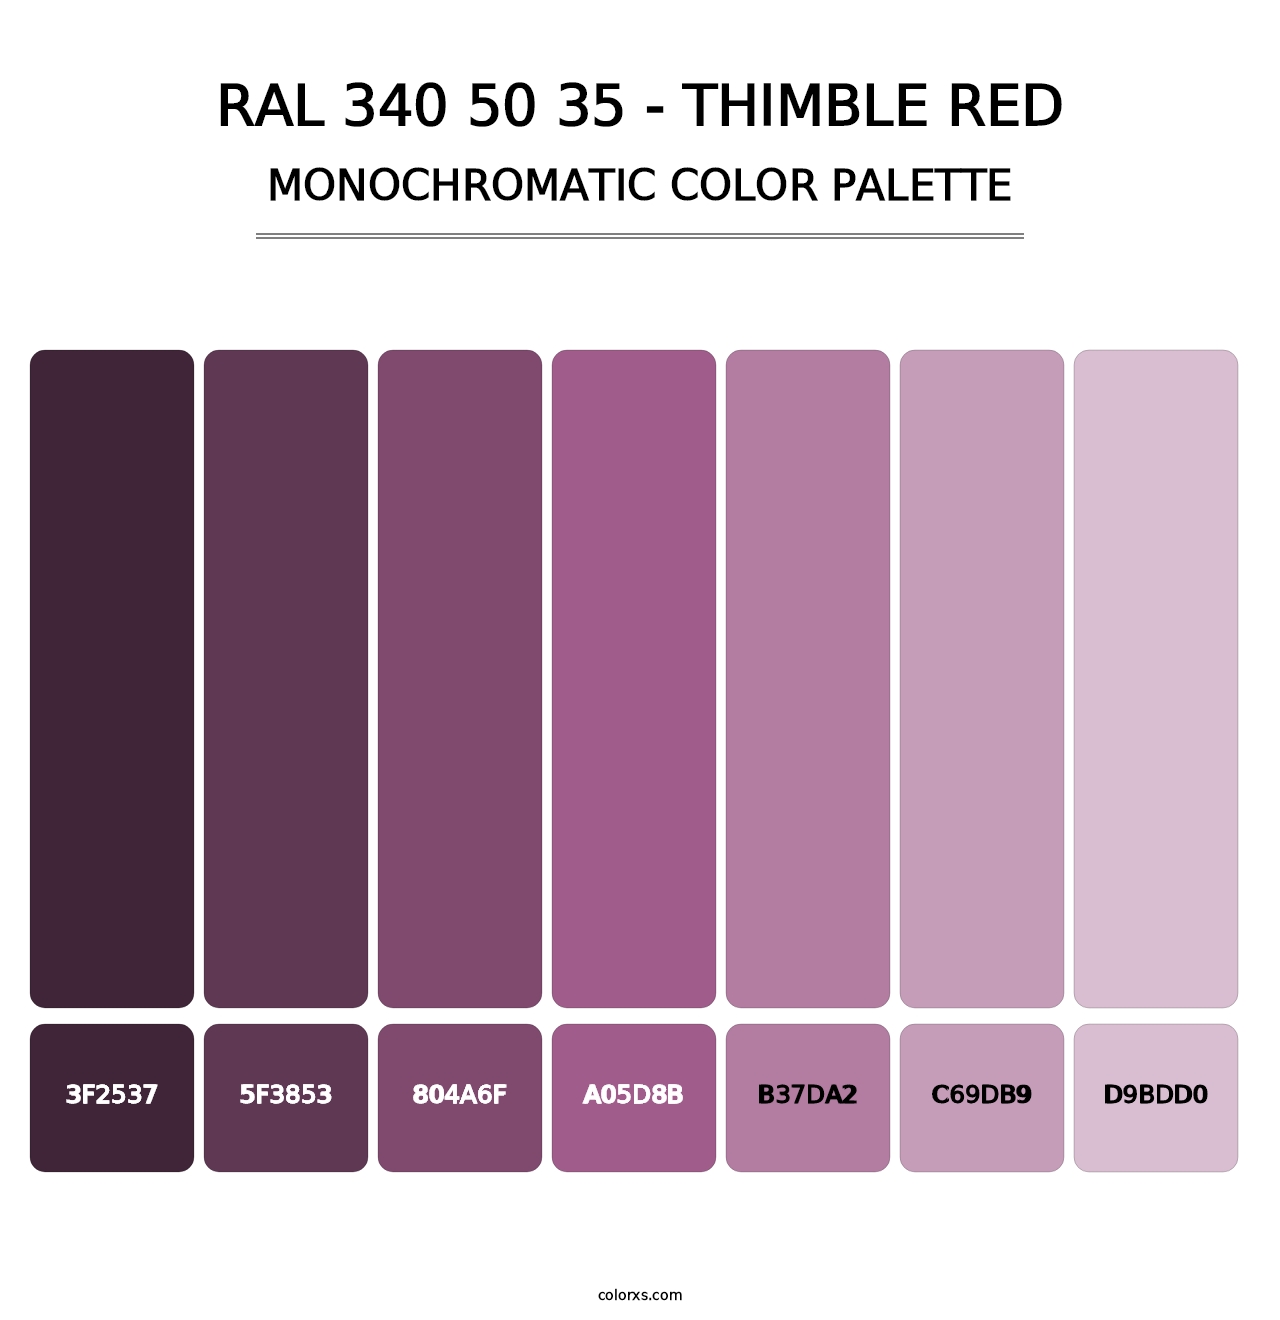 RAL 340 50 35 - Thimble Red - Monochromatic Color Palette